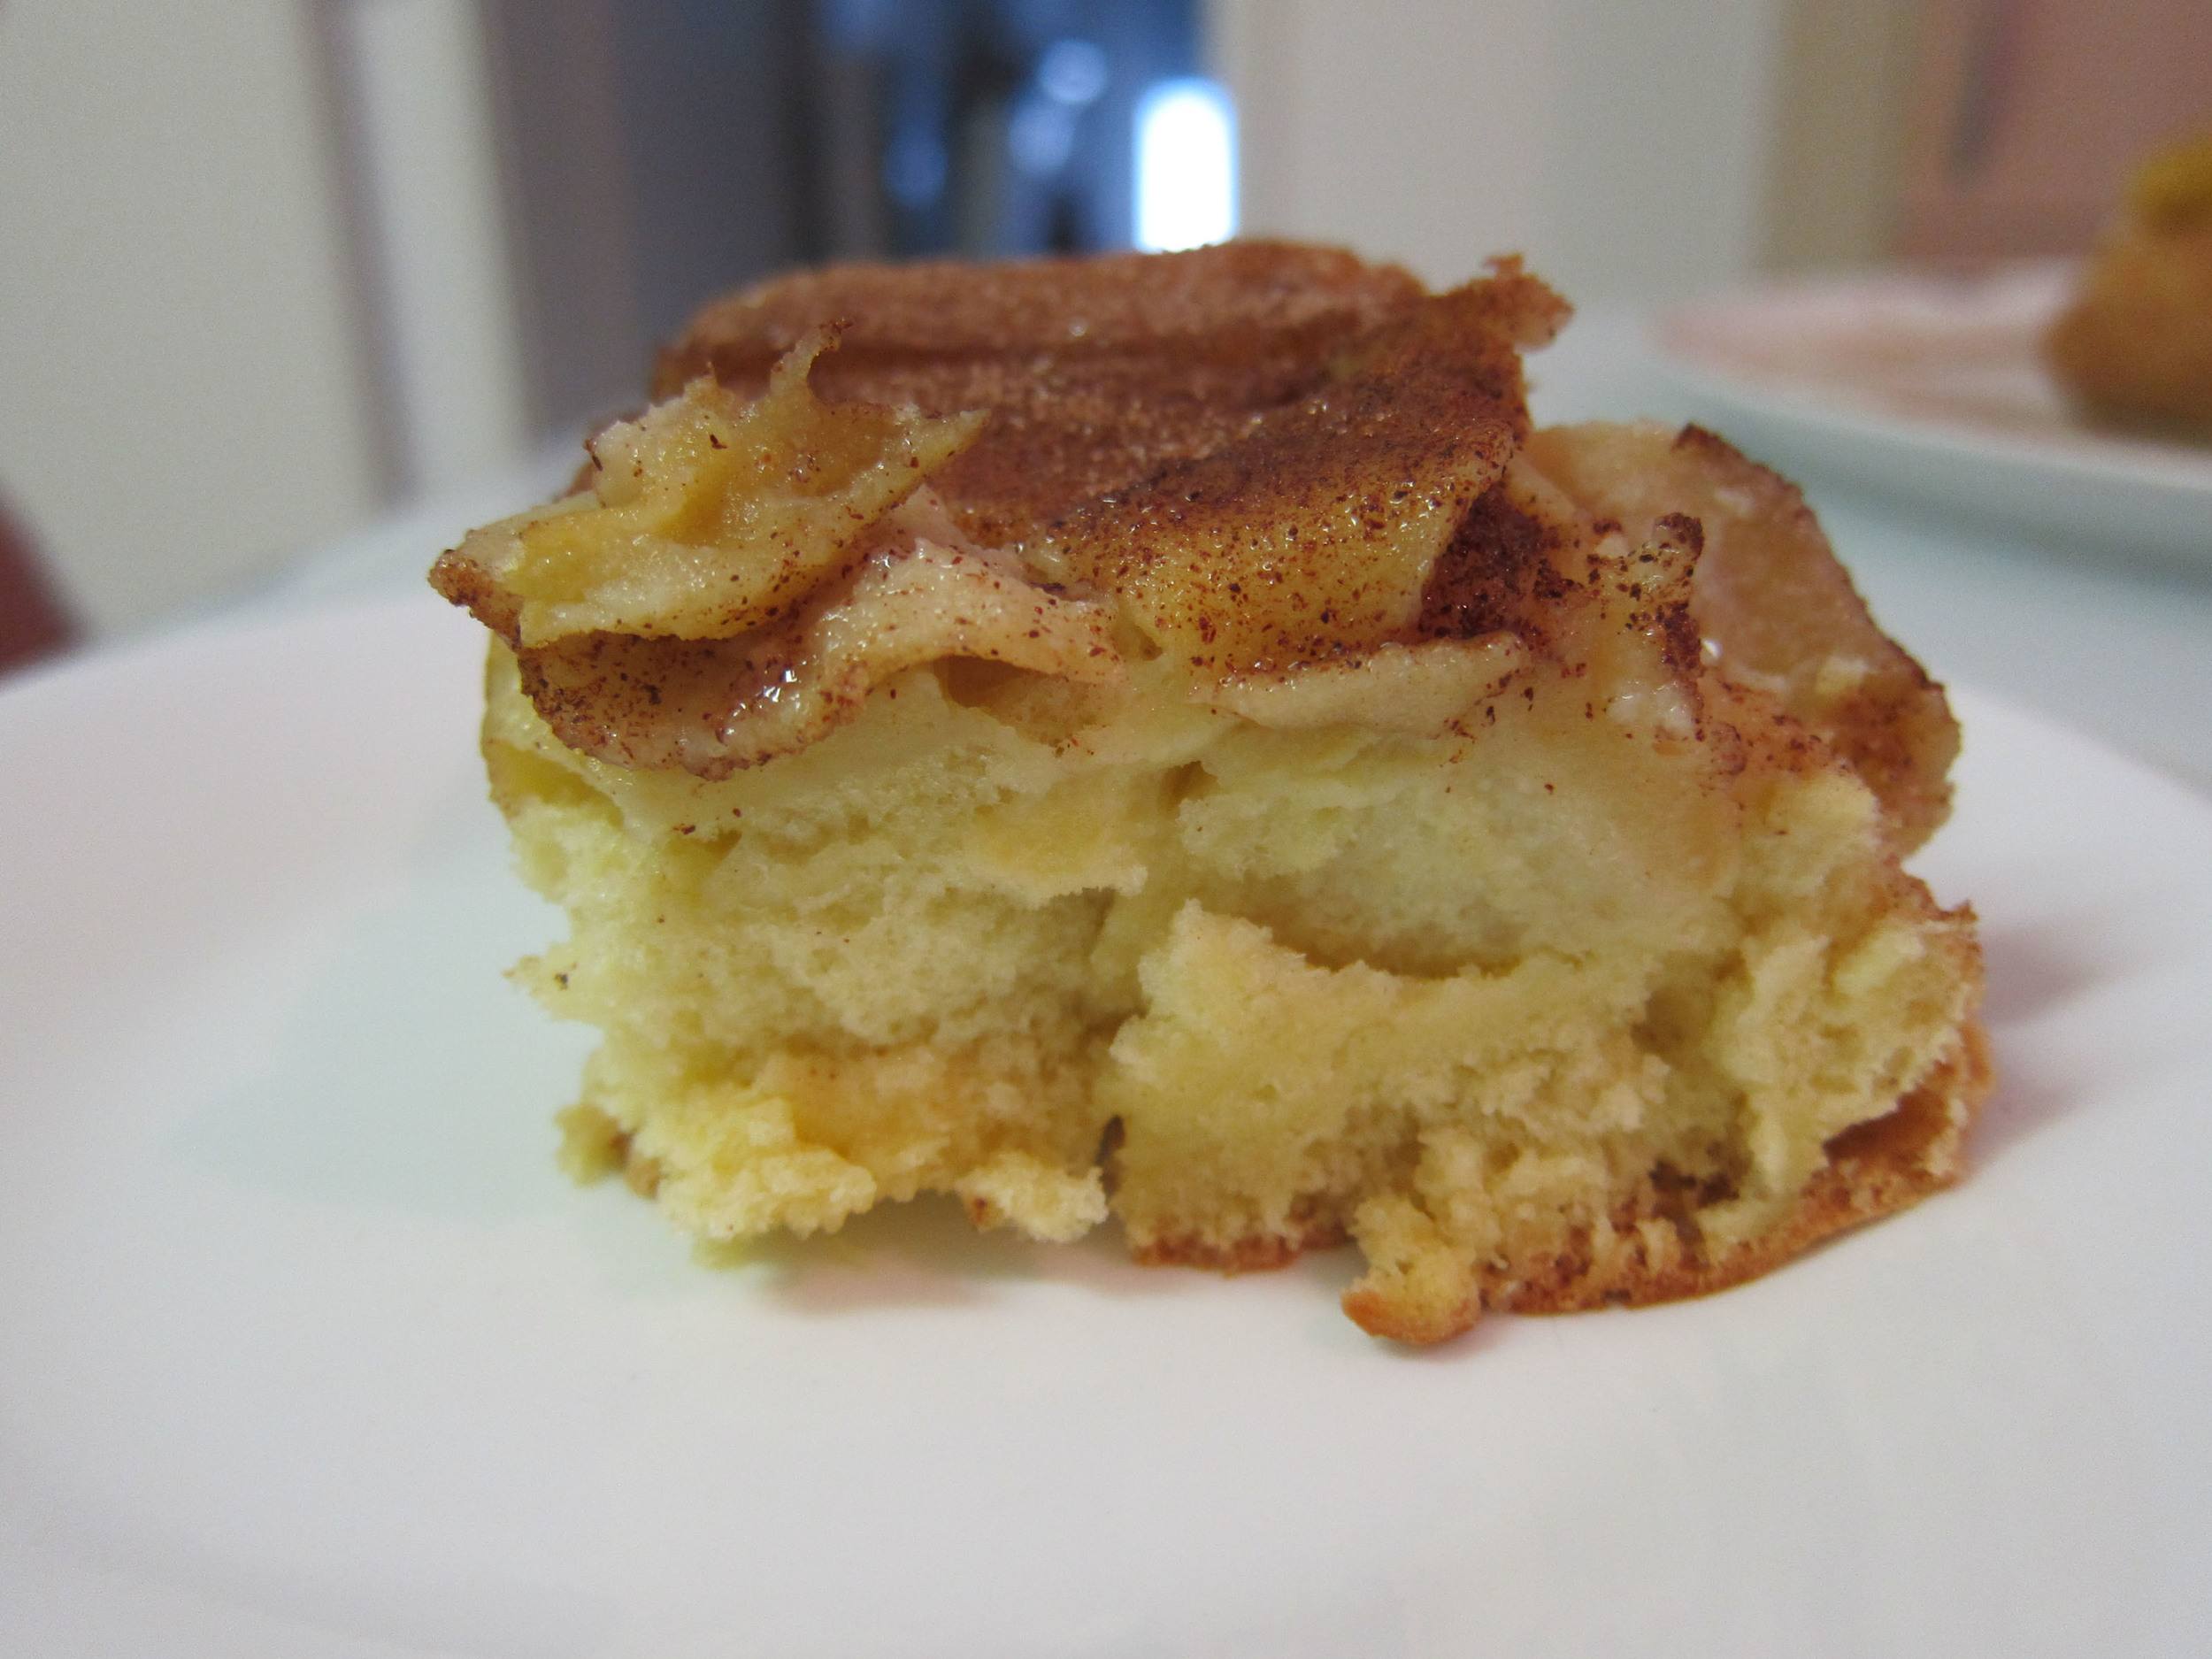 A slice of cinnamon-y apple cake from Lithuania.